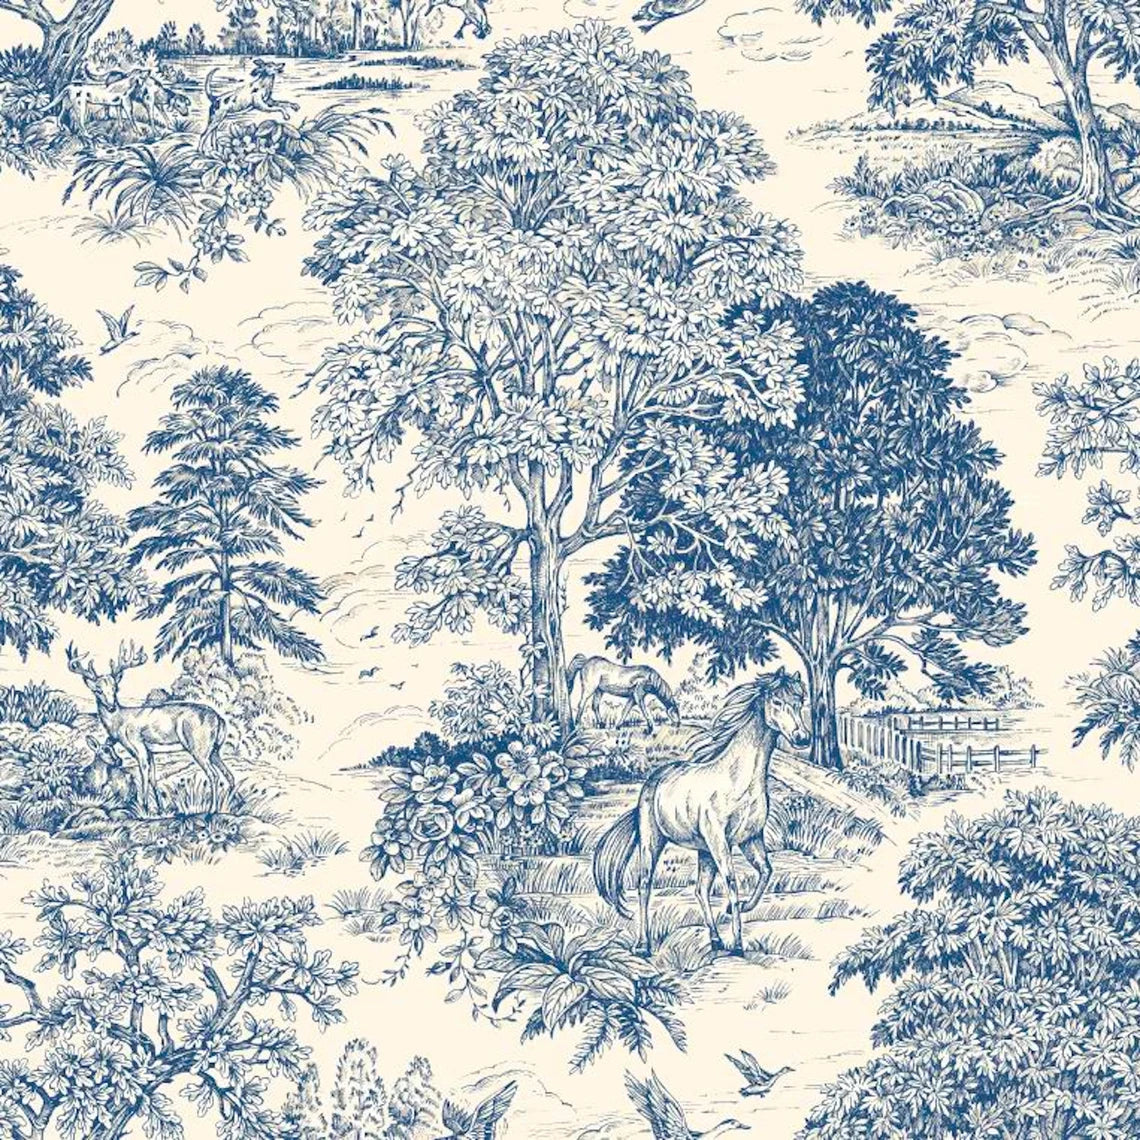 tab top curtain panels pair in Yellowstone Bluebell Blue Country Toile- Horses, Deer, Dogs- Large Scale